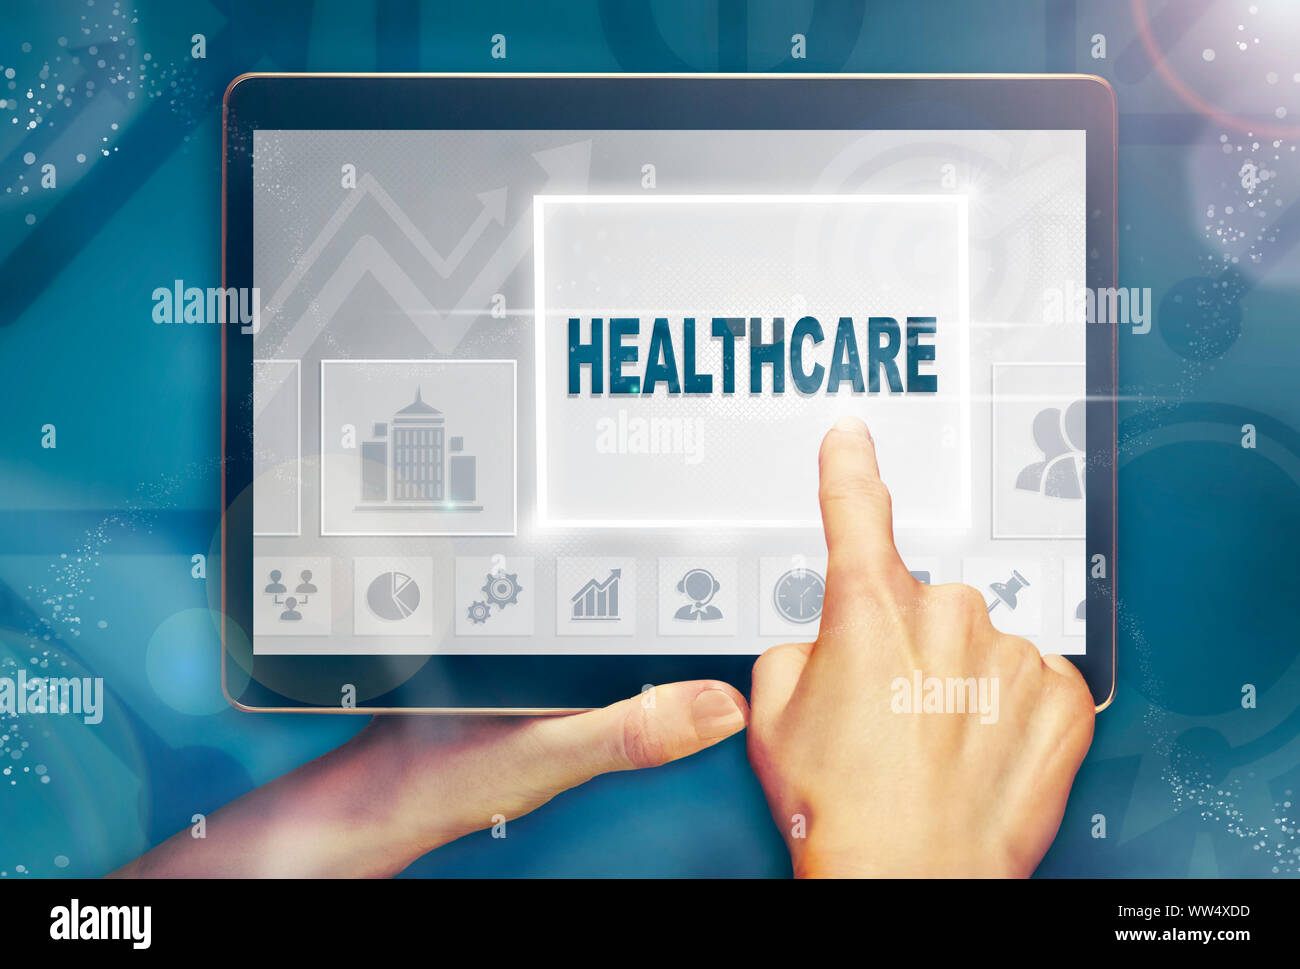 A hand selecting a Healthcare business concept on a computer tablet screen with a colorful background. Stock Photo